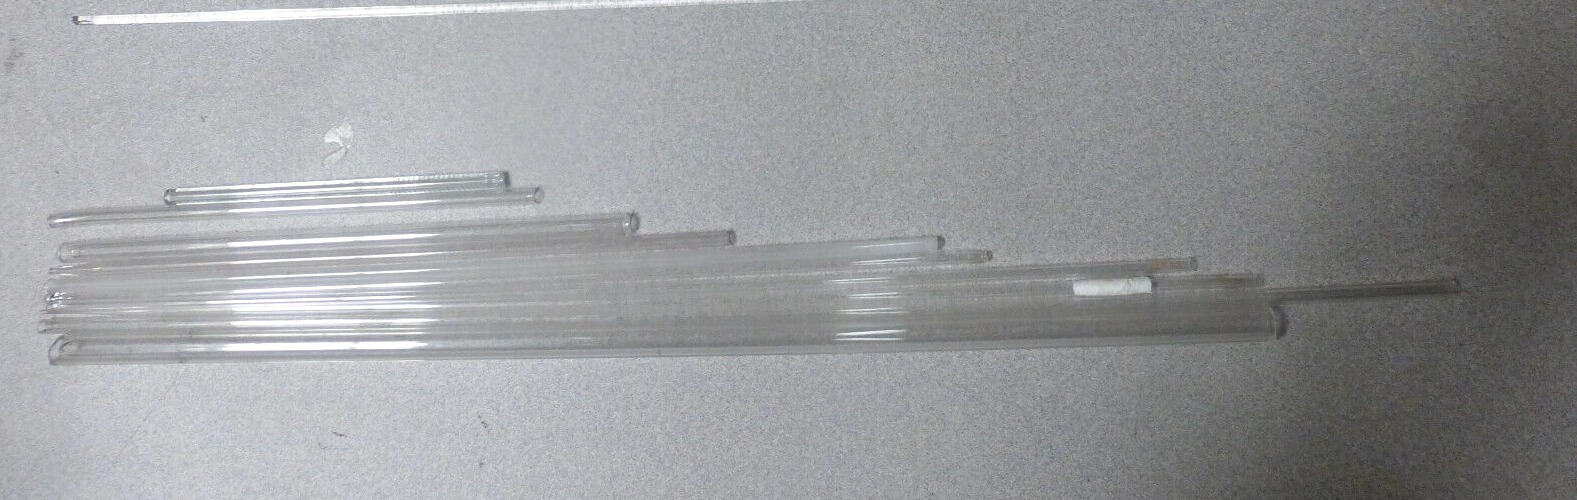 LAB GLASS-TUBES  OF VARYING LENGTH AND DIAMETER - 